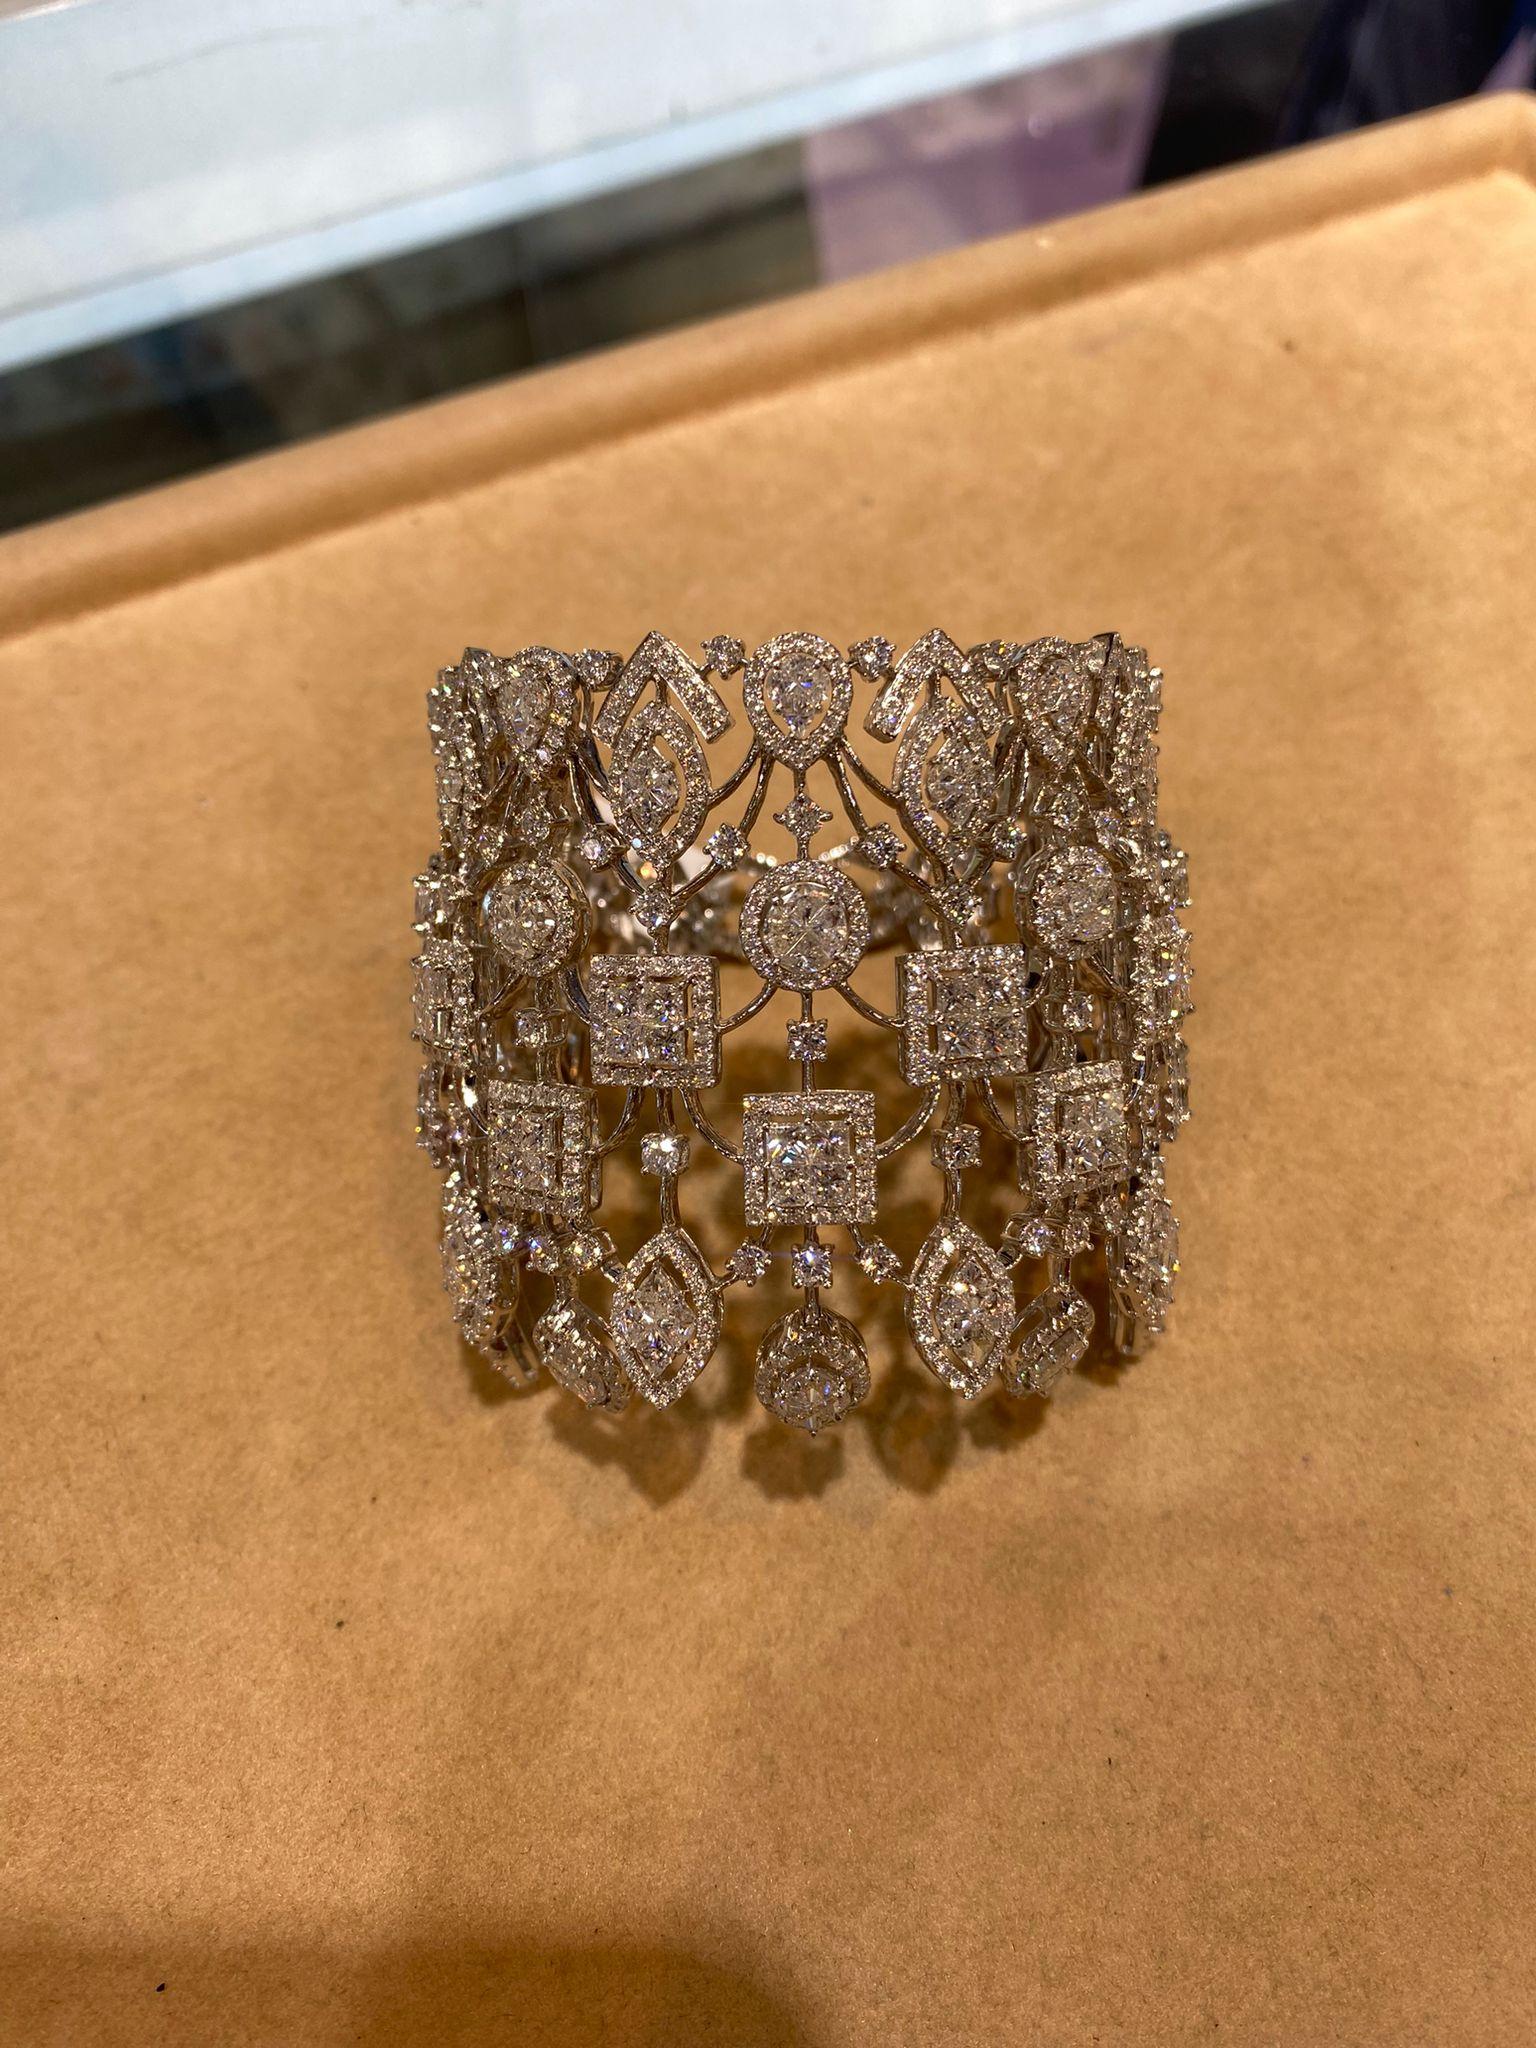 The Following Item we are offering is this Beautiful Rare Important 18KT Gold Sparkling Bracelet Cuff Bracelet FEATURES an Array of Magnificent Rare Assorted Gorgeous Fancy Baguette Cut Cluster Diamonds surrounded with Magnificent Round Diamonds.